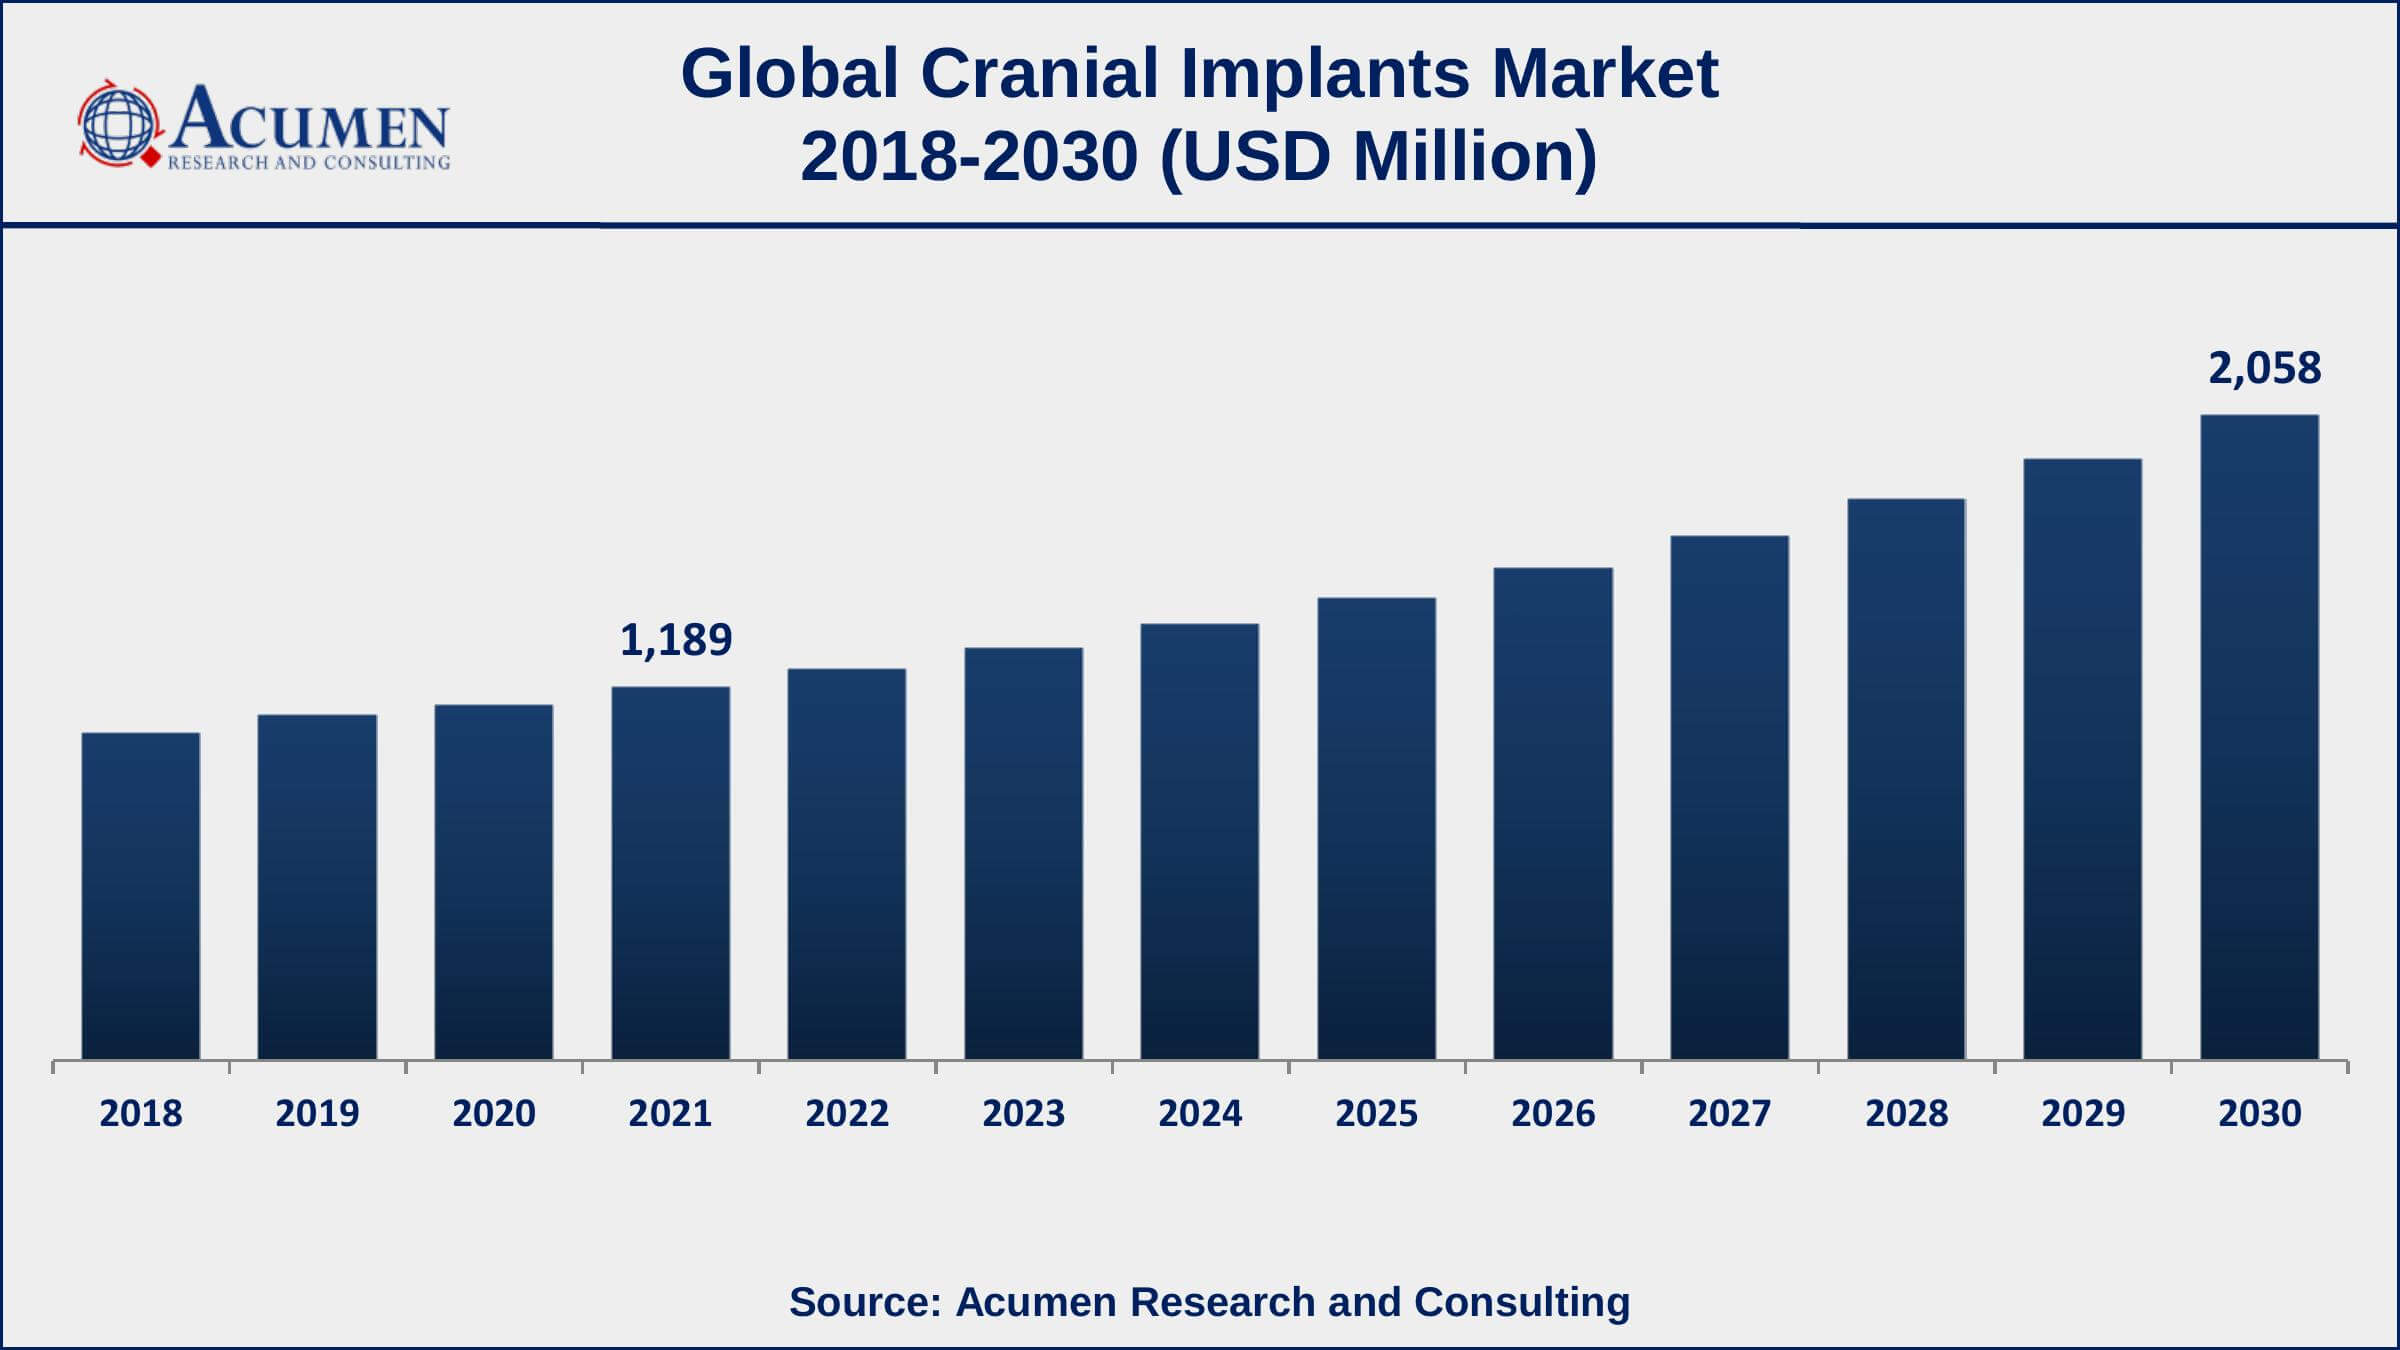 North America region led with more than 36% cranial implants market share in 2021